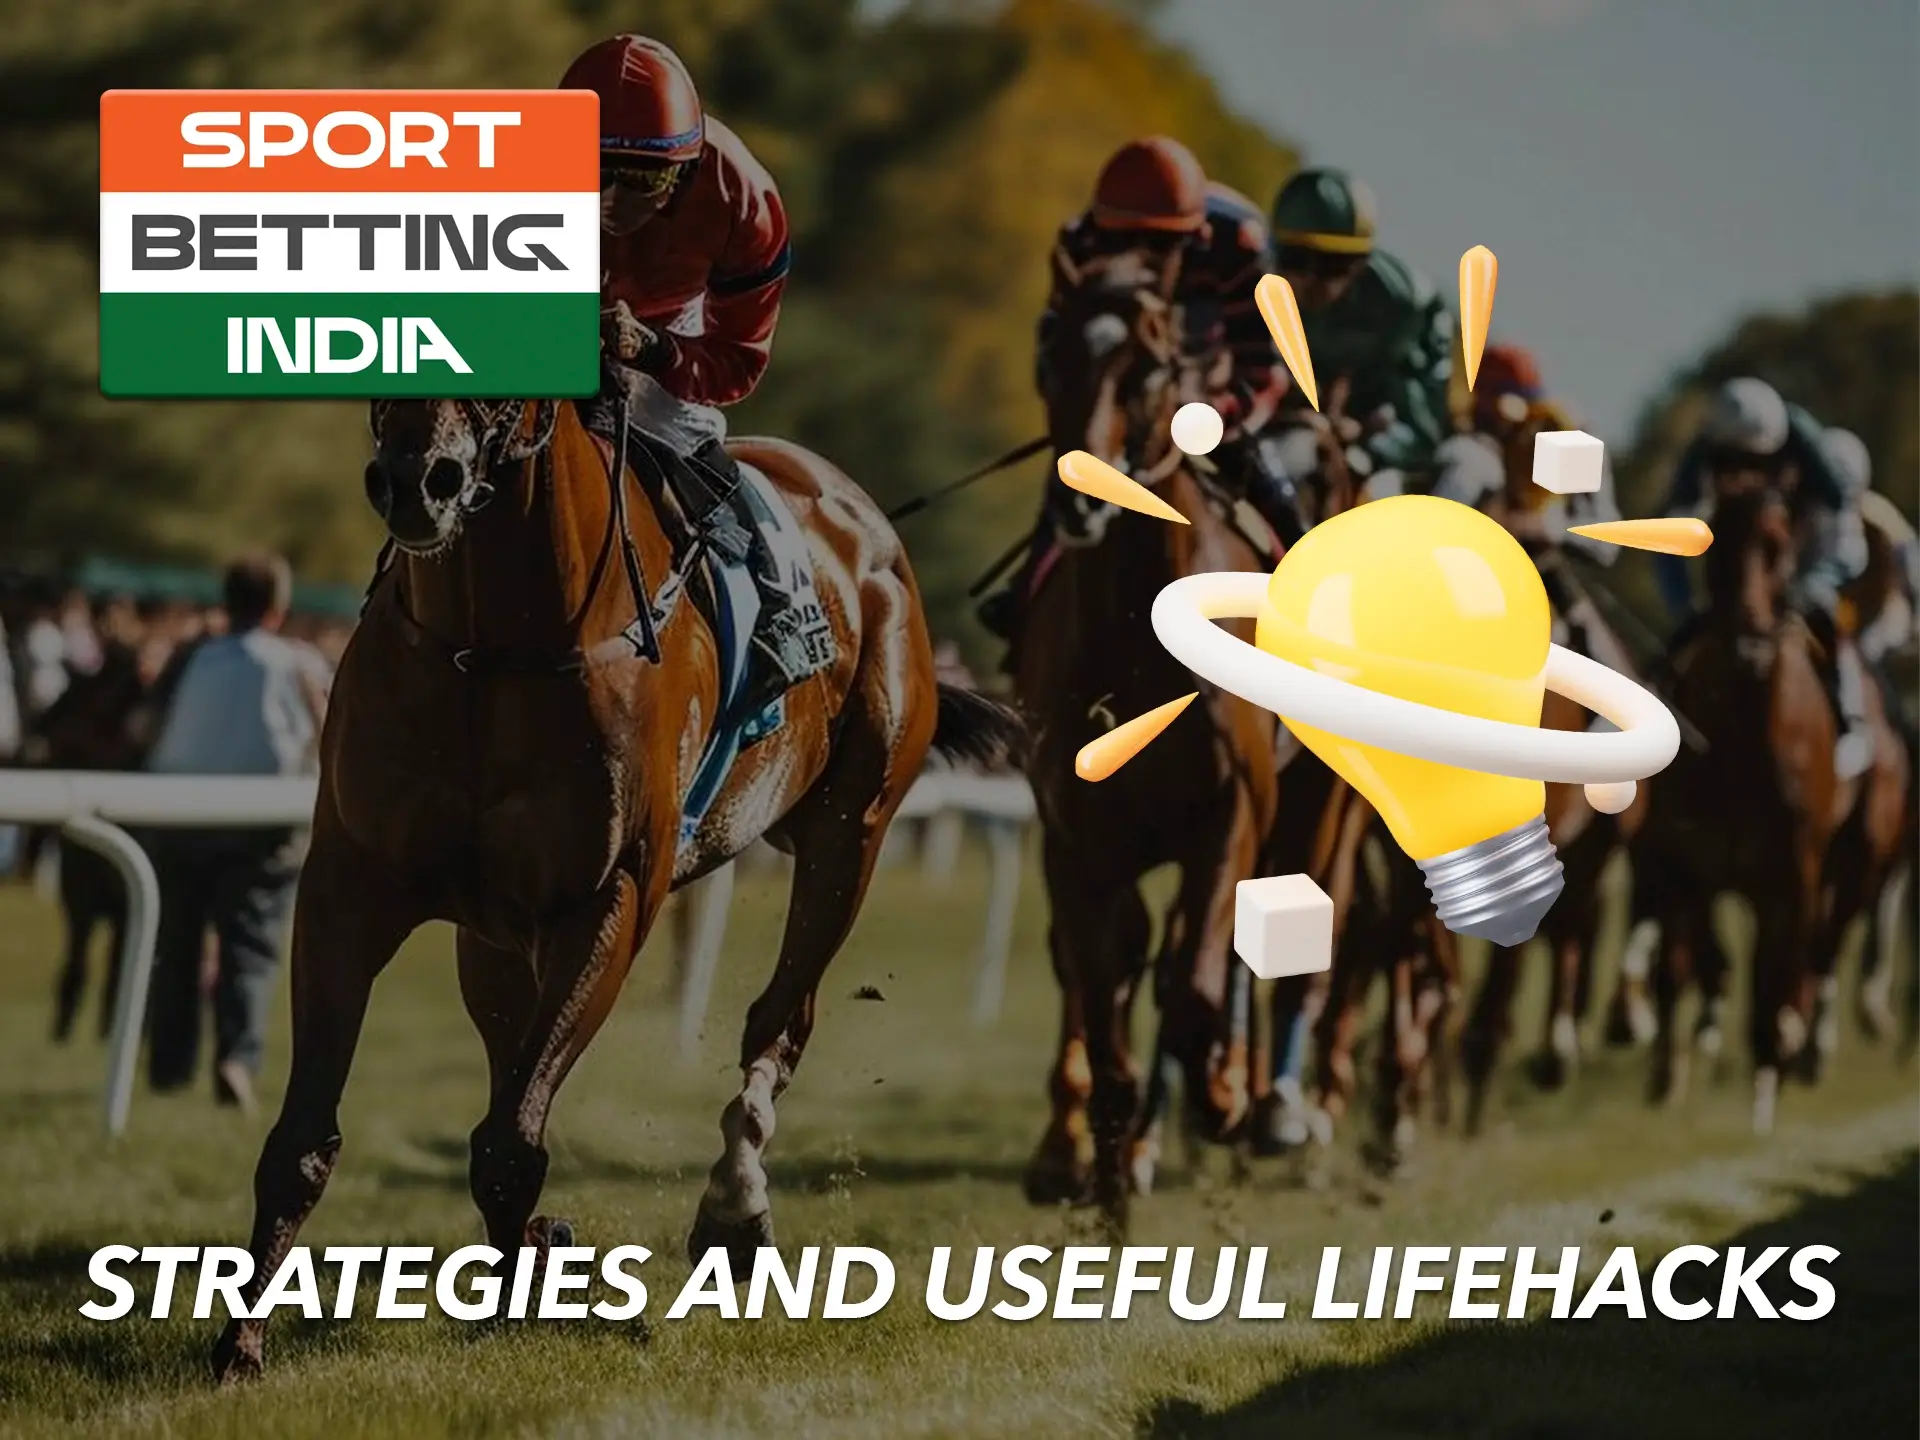 Use your knowledge and skills when betting on horse racing.